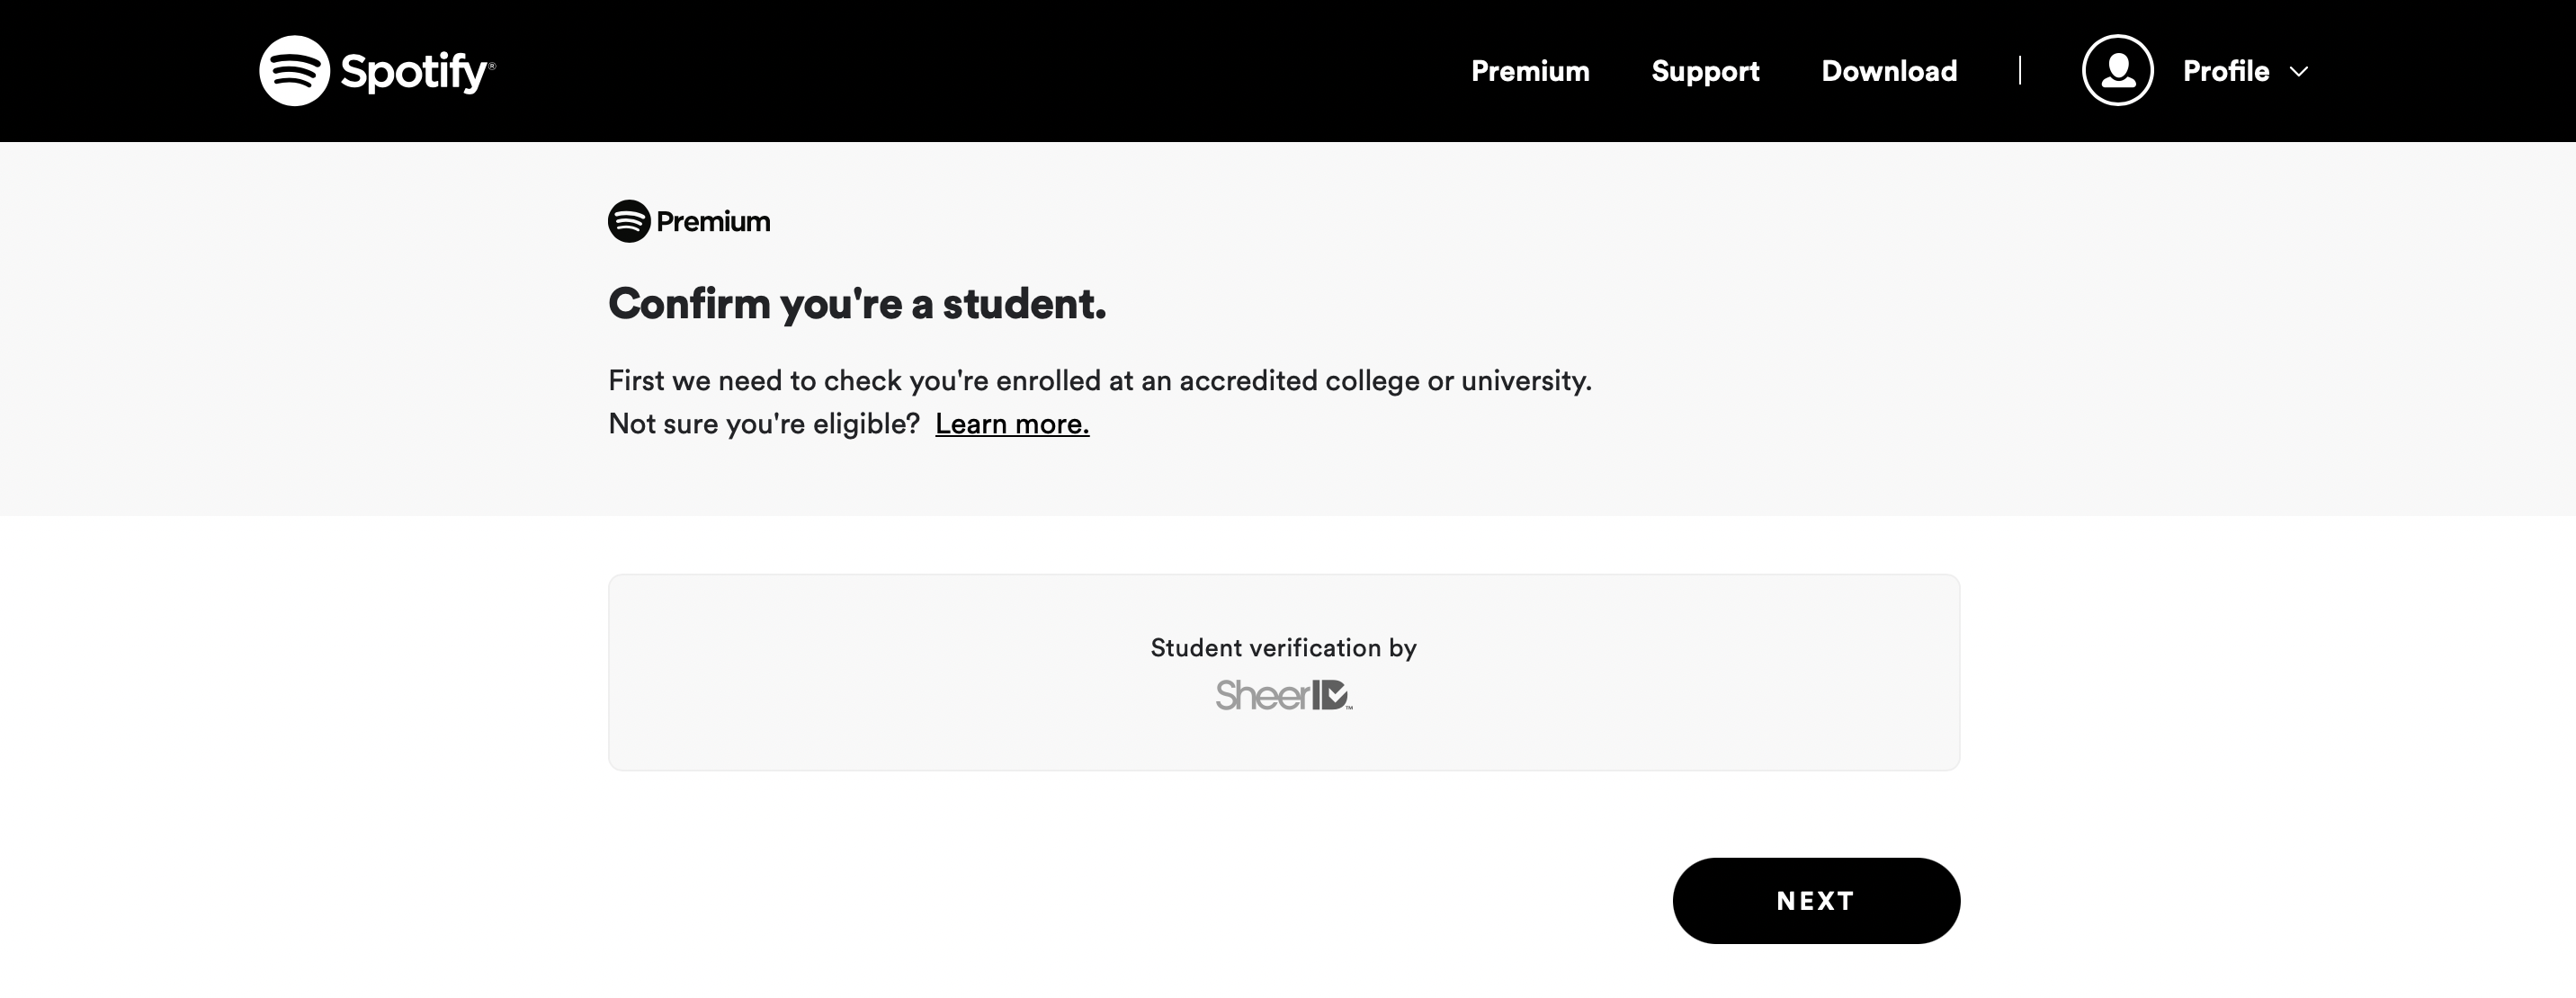 Confirm You're a Student Prompt on Spotify Premium Student